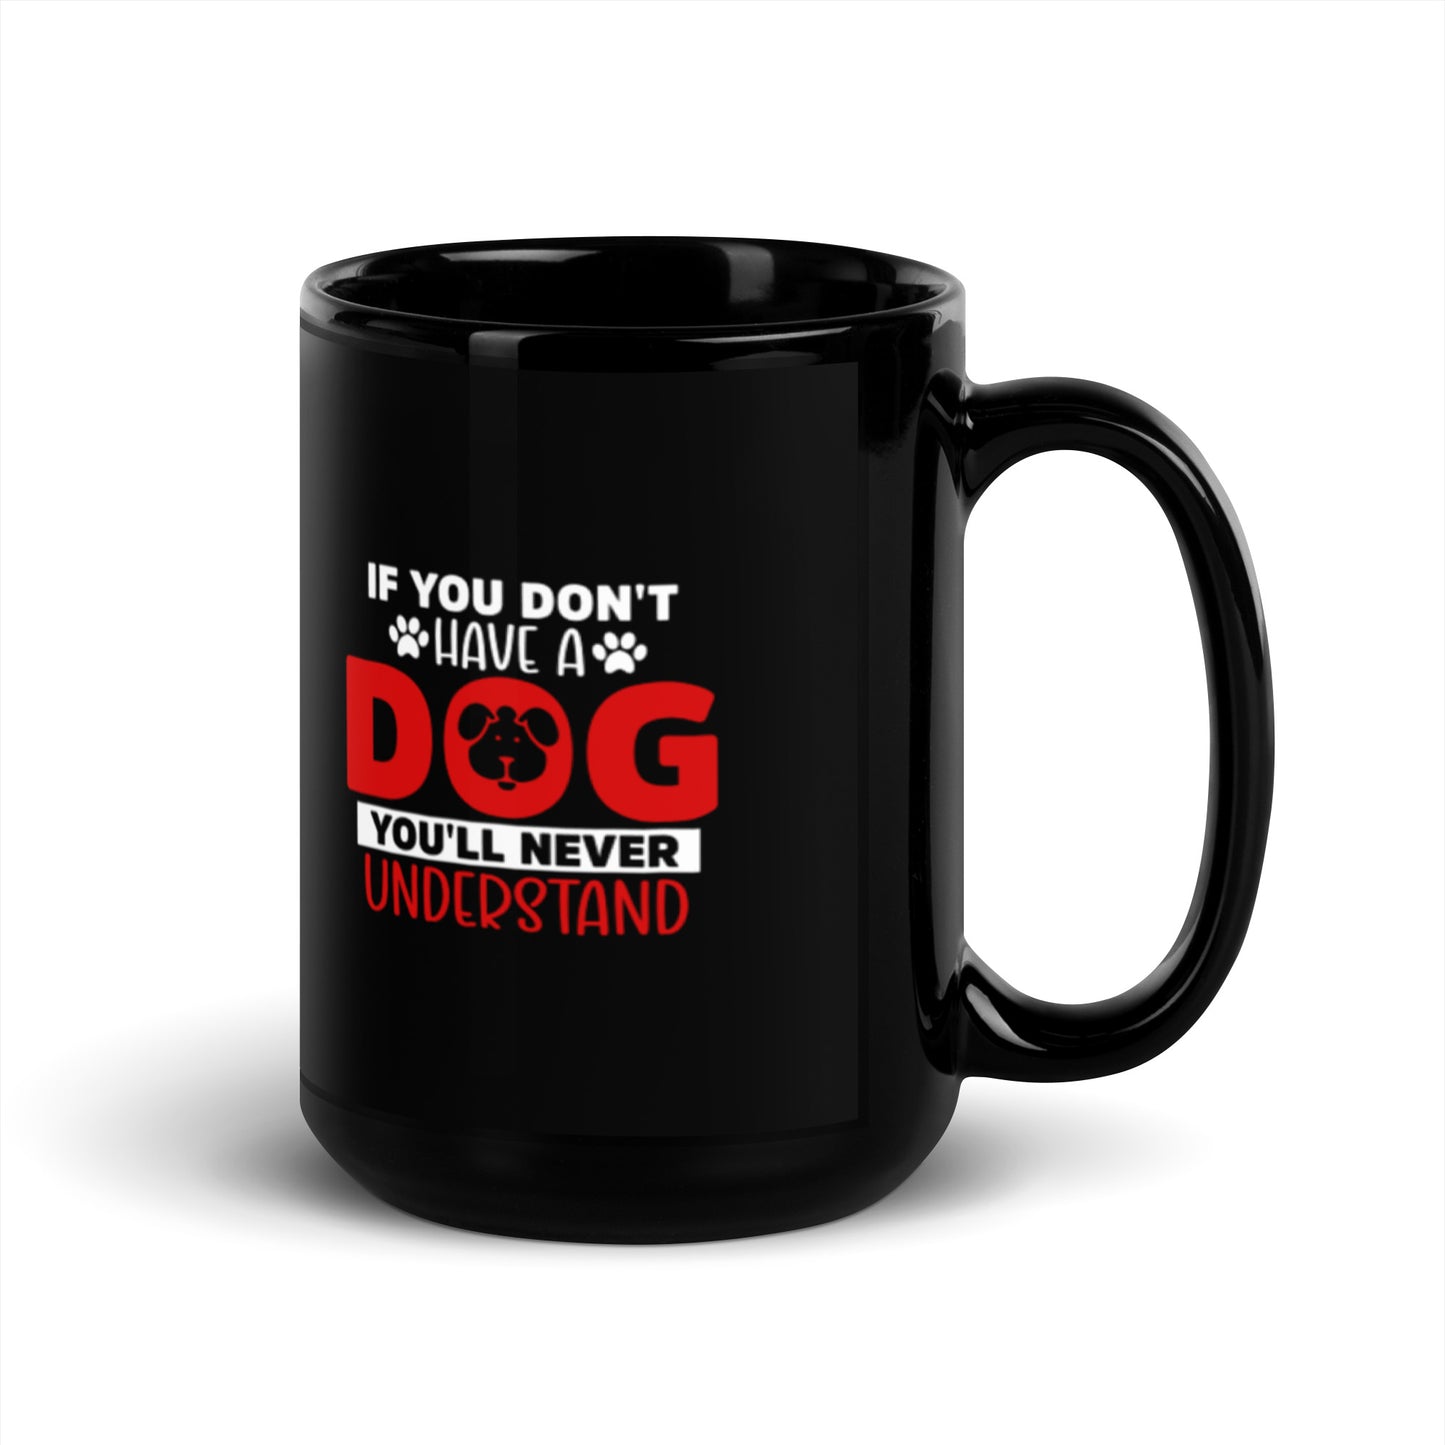 If You Don't Have a Dog You'll Never Understand Black Glossy Mug